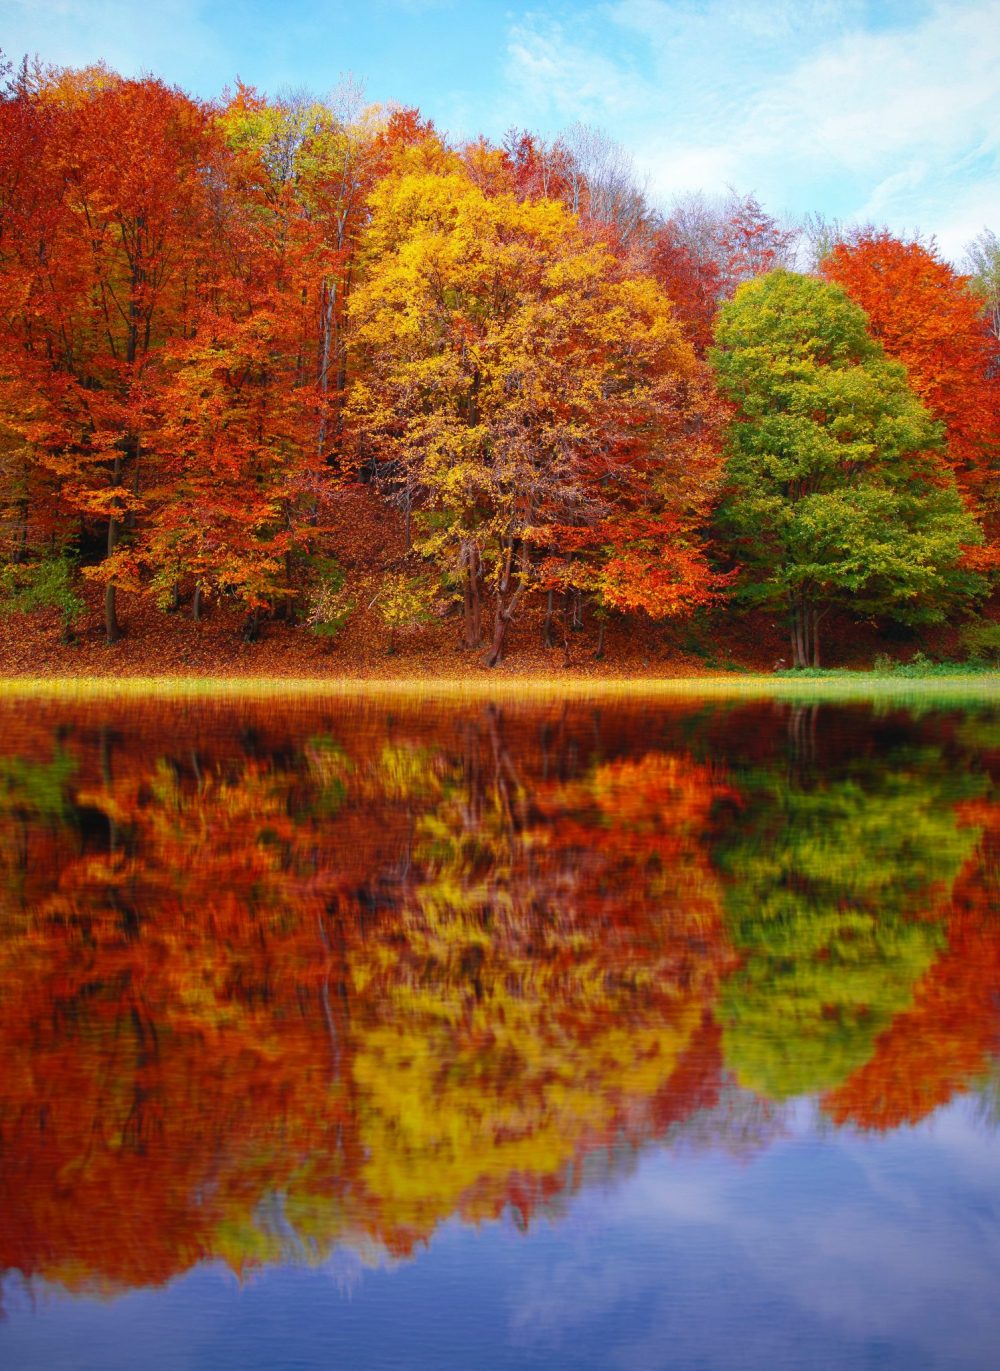 The Best Places To See Fall Foliage In The Mid-West And West